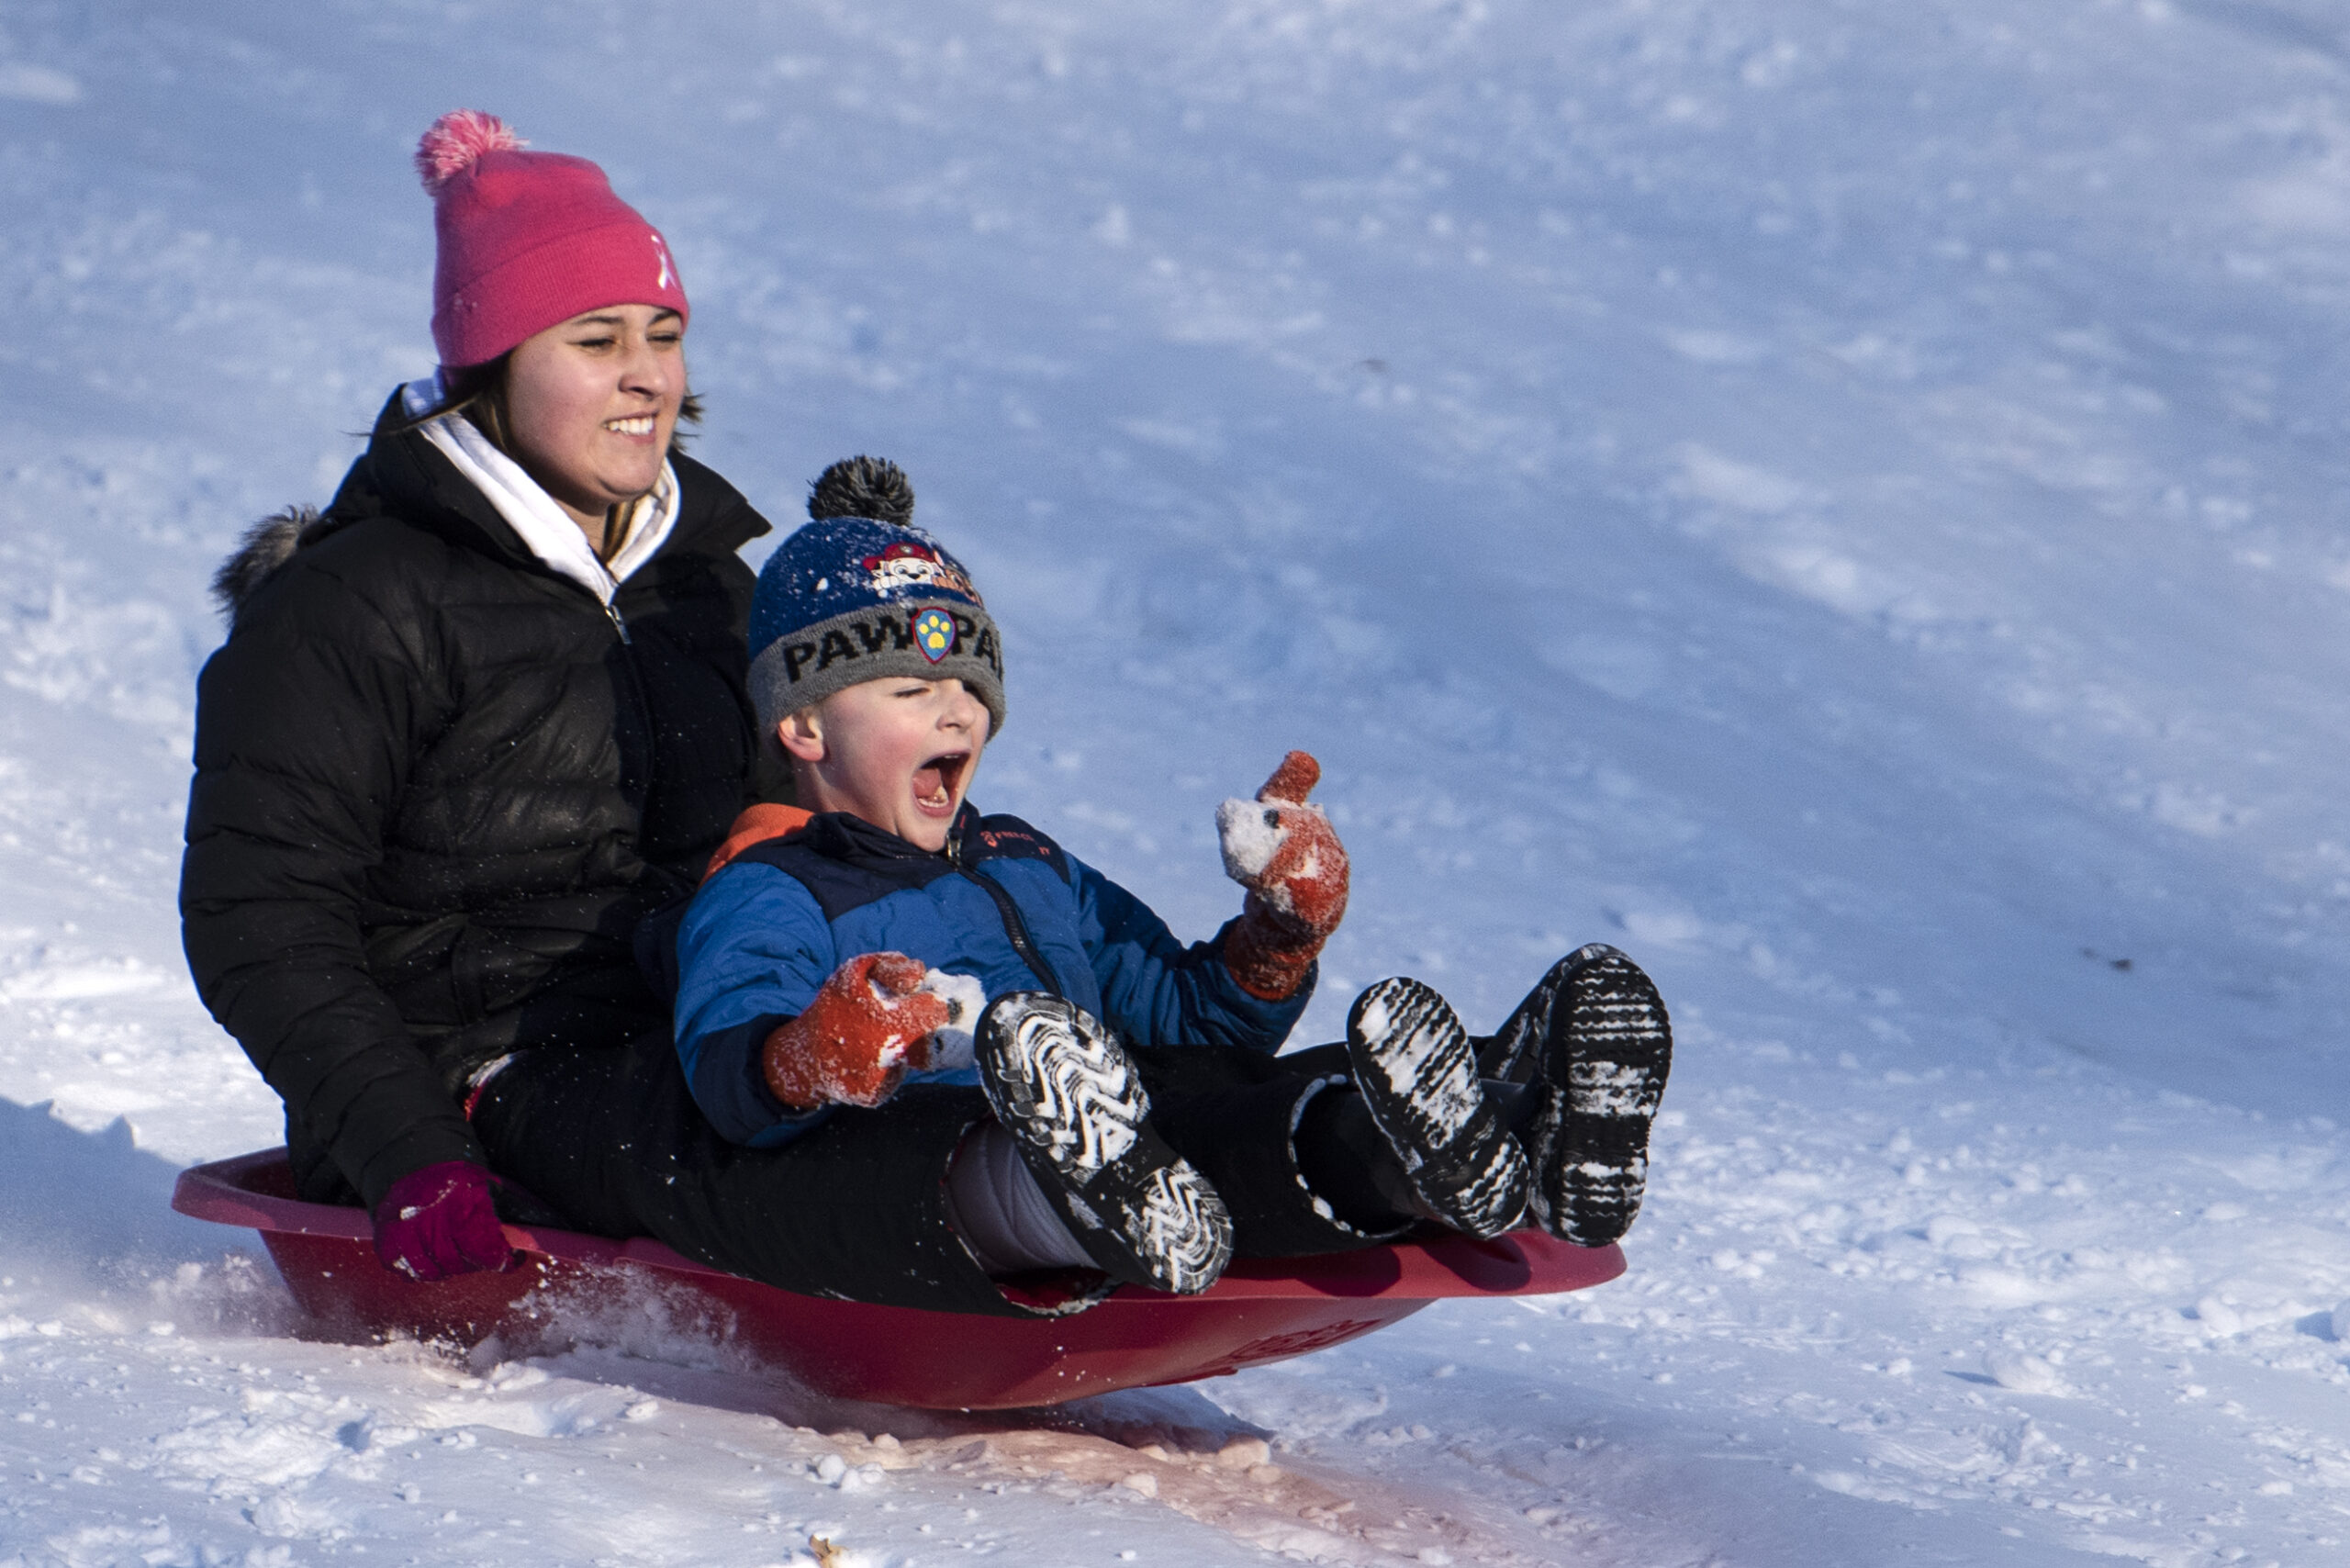 A boy screams as he and his sister hit a bump while sledding down a hill.